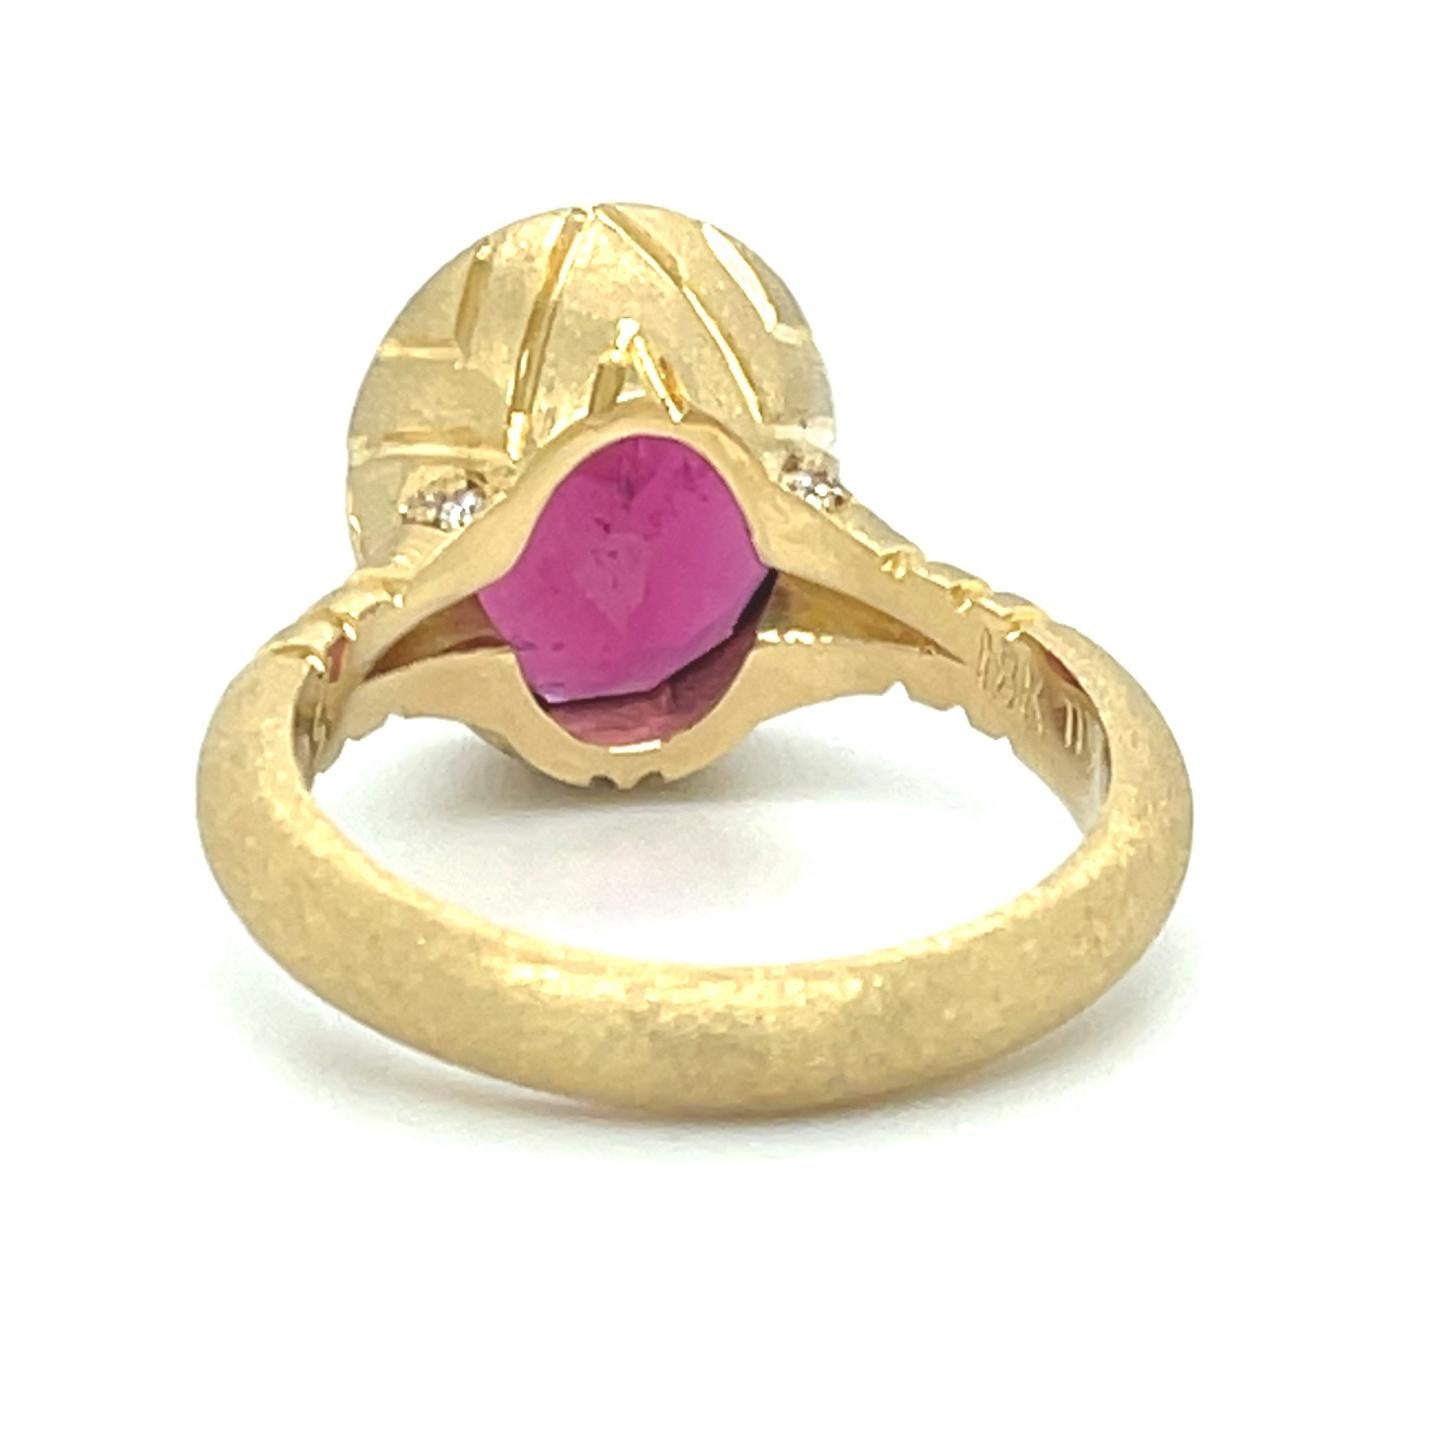 Artisan 5.35 Carat Rubellite Tourmaline and Diamond Band Ring in 18k Yellow Gold  For Sale